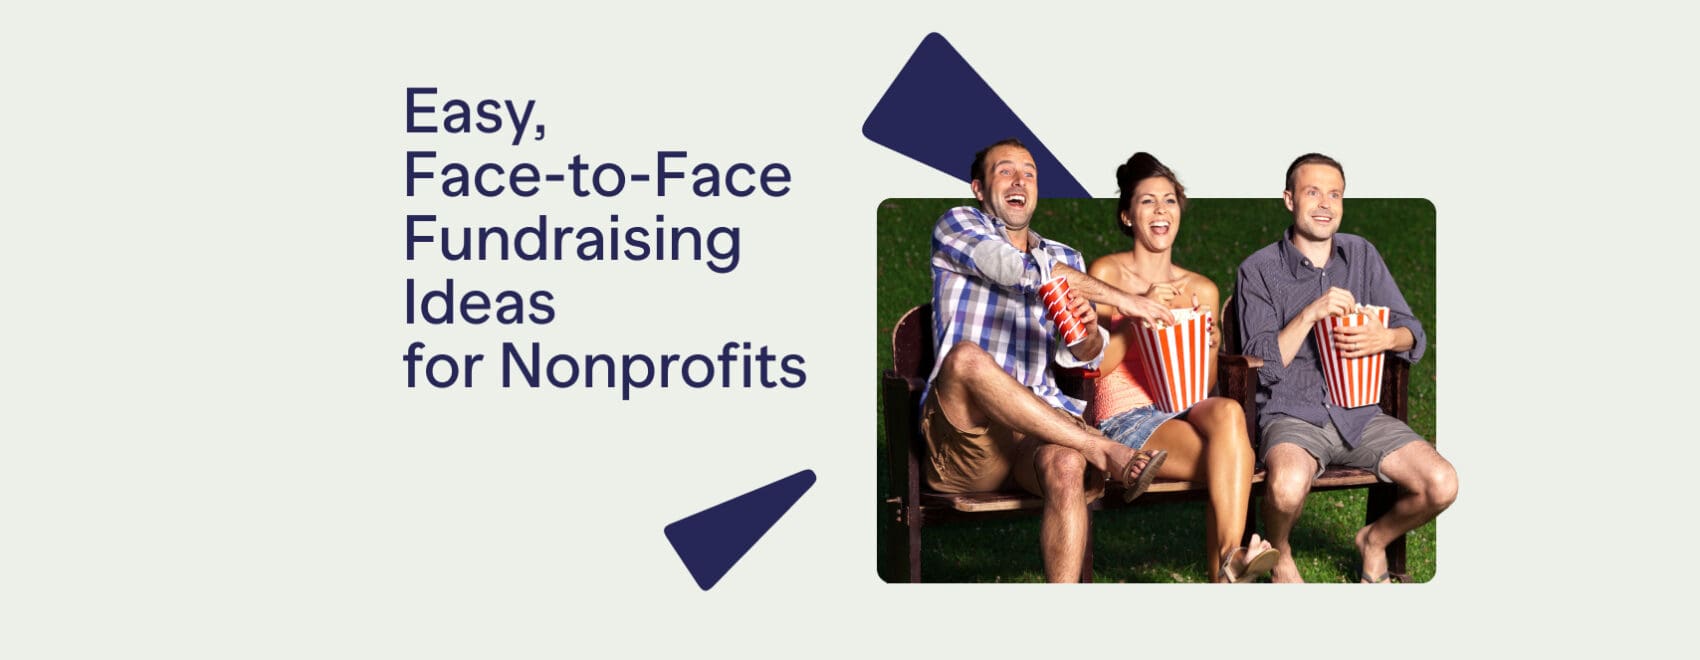 Face to Face Fundraising Ideas for Nonprofits people with snacks